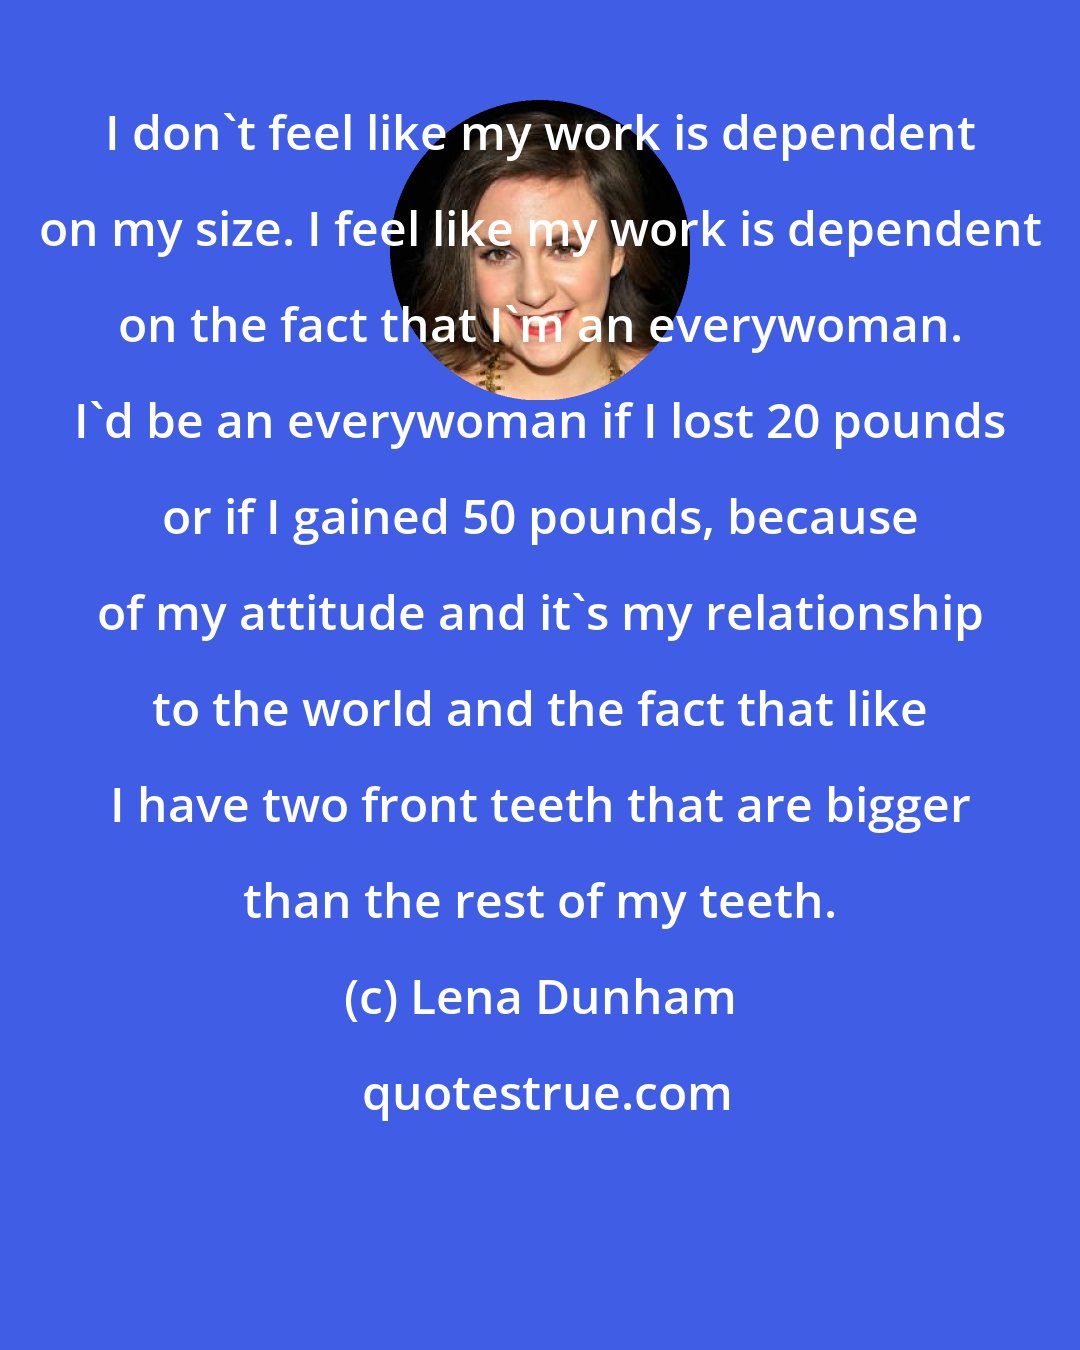 Lena Dunham: I don't feel like my work is dependent on my size. I feel like my work is dependent on the fact that I'm an everywoman. I'd be an everywoman if I lost 20 pounds or if I gained 50 pounds, because of my attitude and it's my relationship to the world and the fact that like I have two front teeth that are bigger than the rest of my teeth.